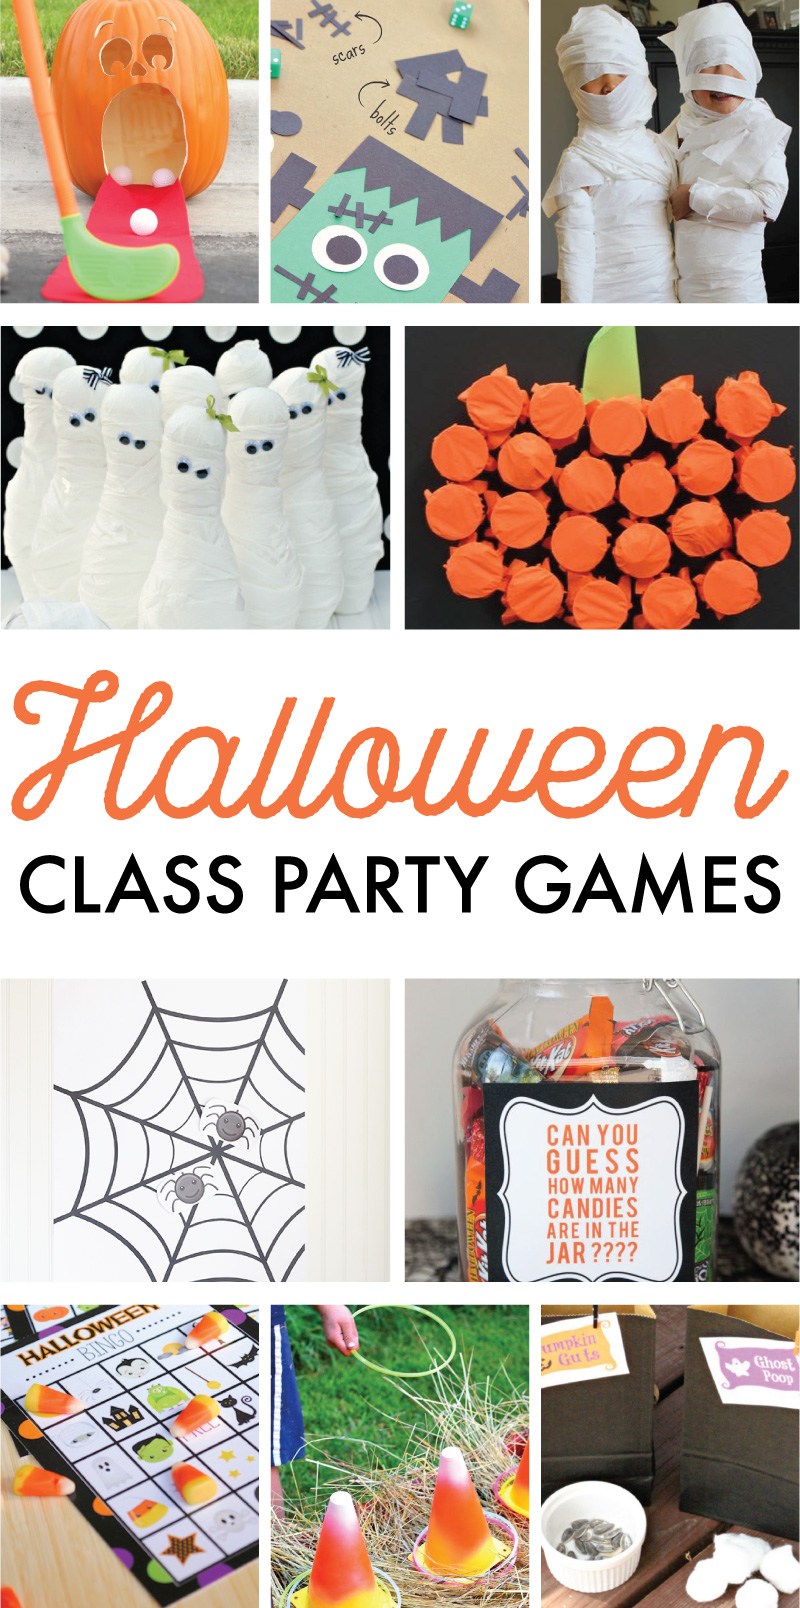 10 Halloween Class Party Games on Love the Day